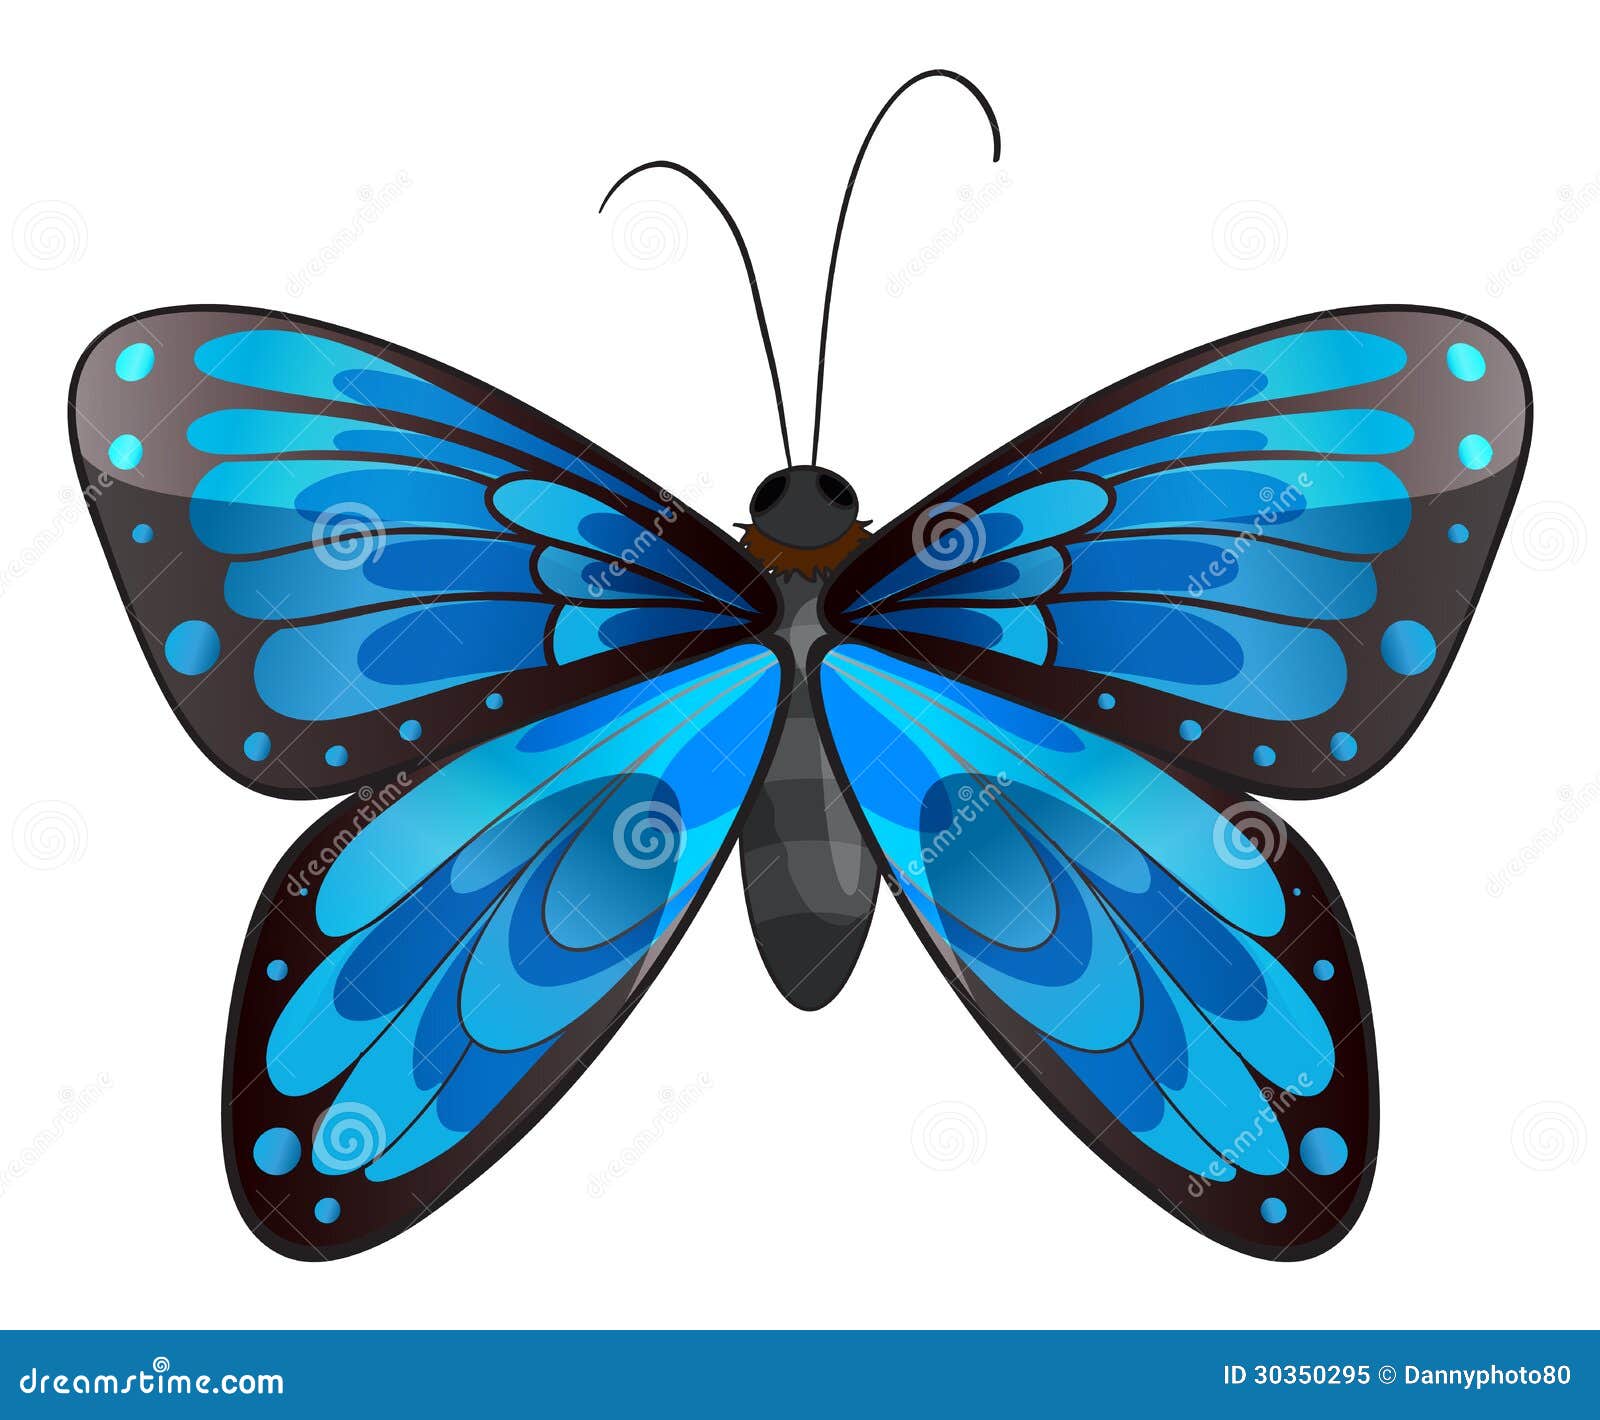 butterfly clipart no background - photo #17